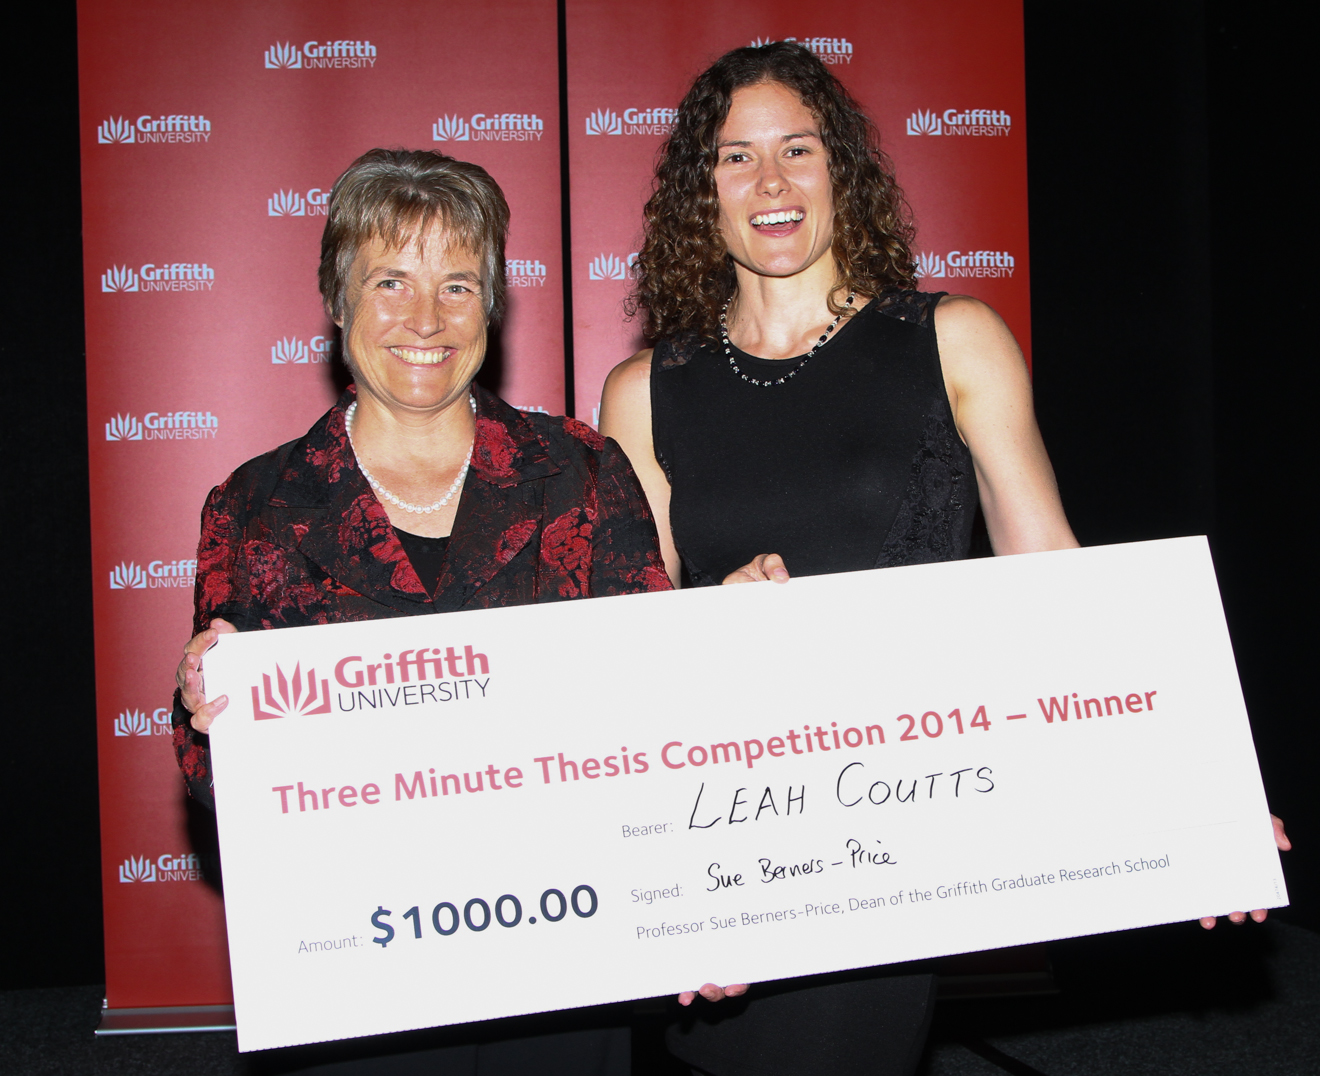 Dean of the Griffith Graduate Research School, Professor Sue Berners-Price and winner of the 2014 Three Minute Thesis Challenge, PhD candidate, Leah Coutts